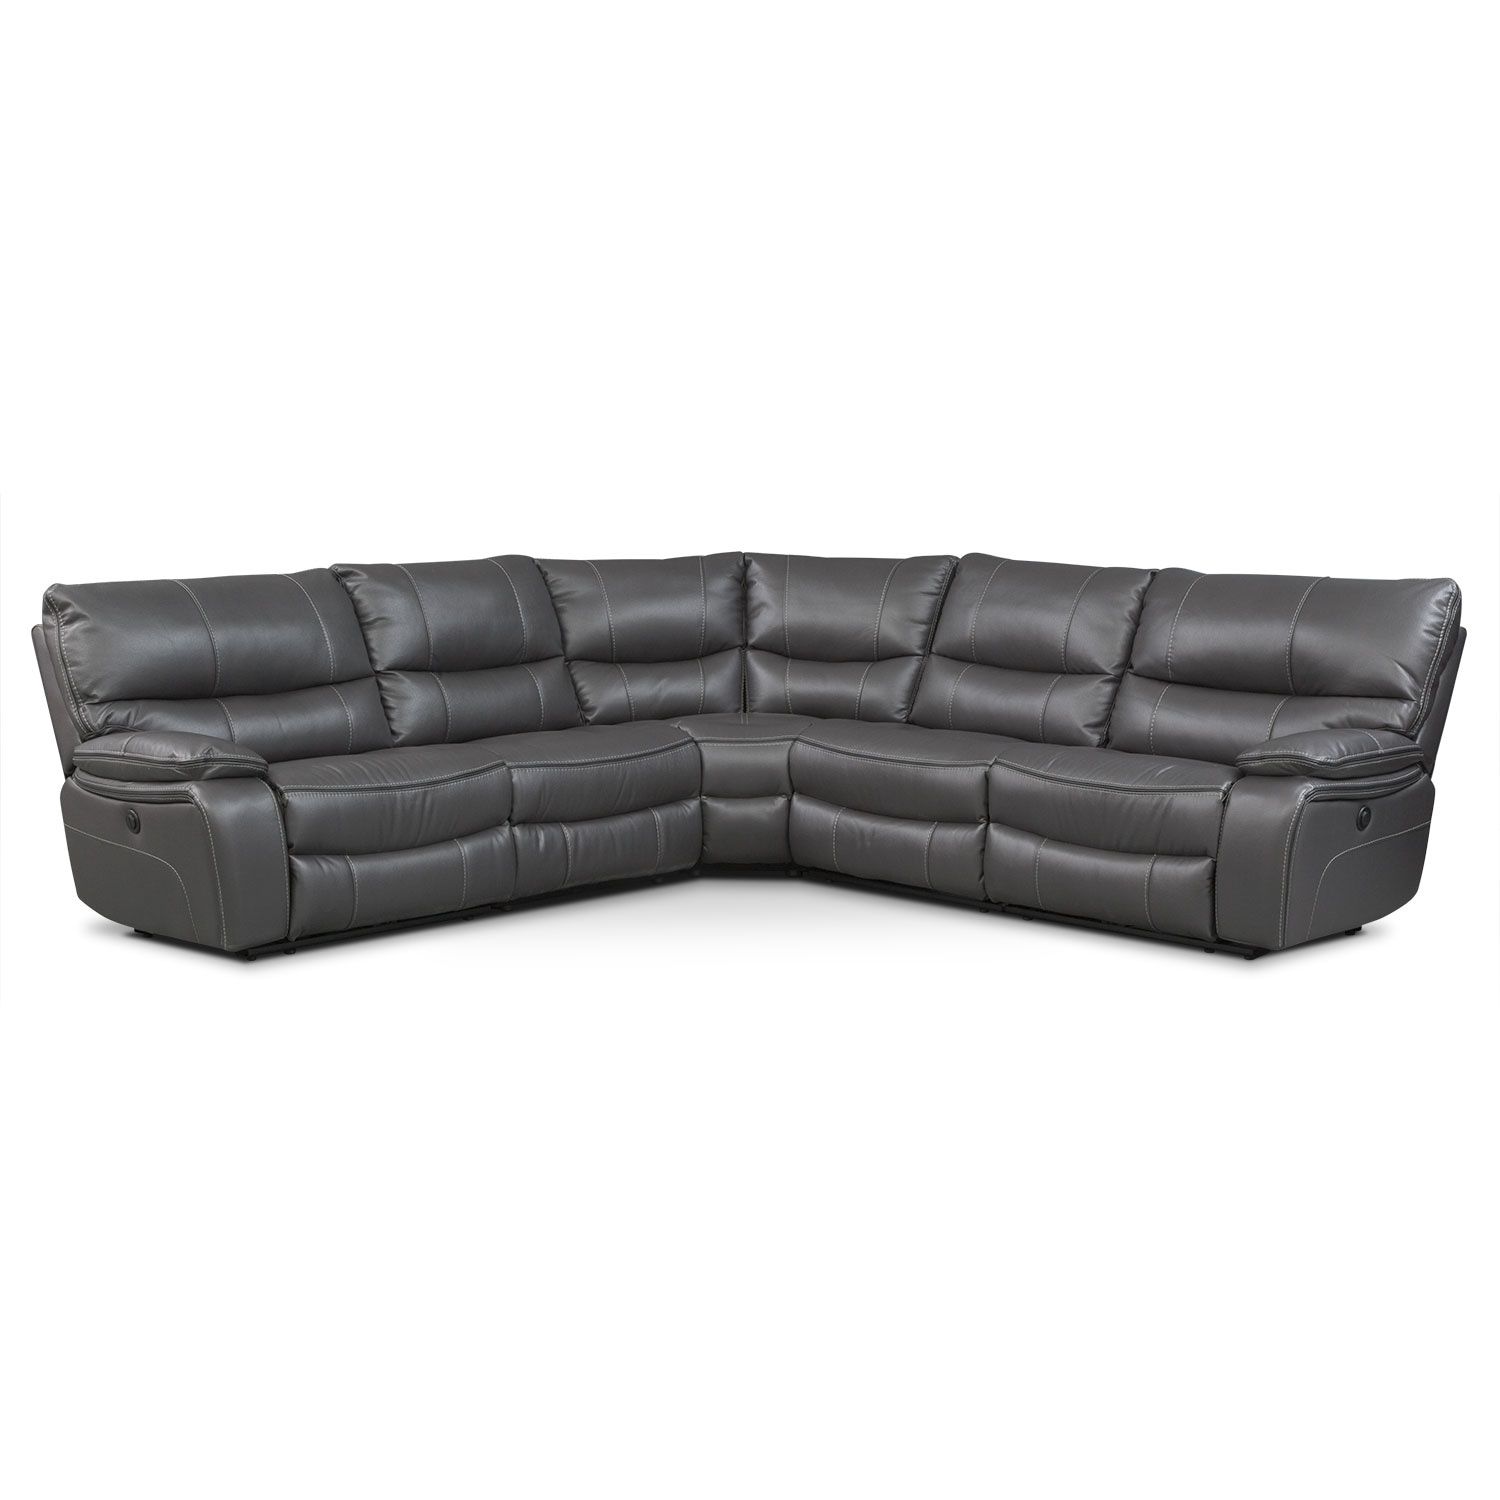 Orlando 6 Piece Power Reclining Sectional With 1 Stationary Chair For Orlando Sectional Sofas (View 5 of 10)